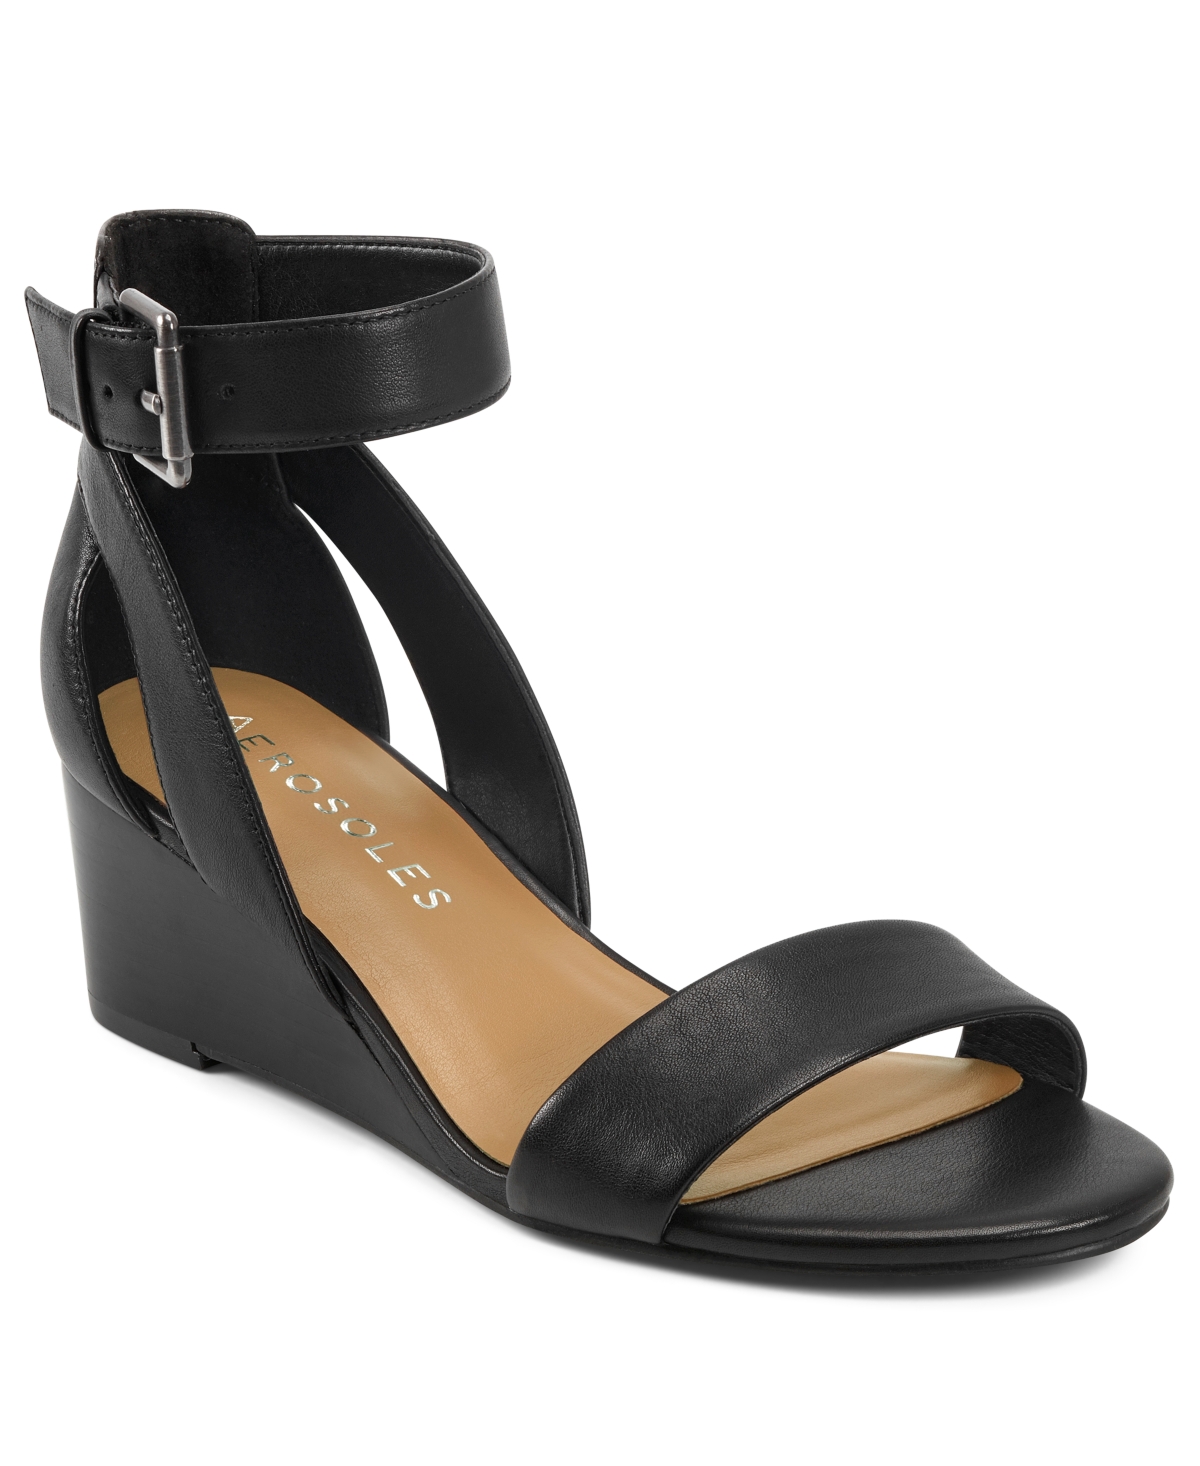 UPC 887039887433 product image for Aerosoles Willowbrook Wedge Sandals Women's Shoes | upcitemdb.com